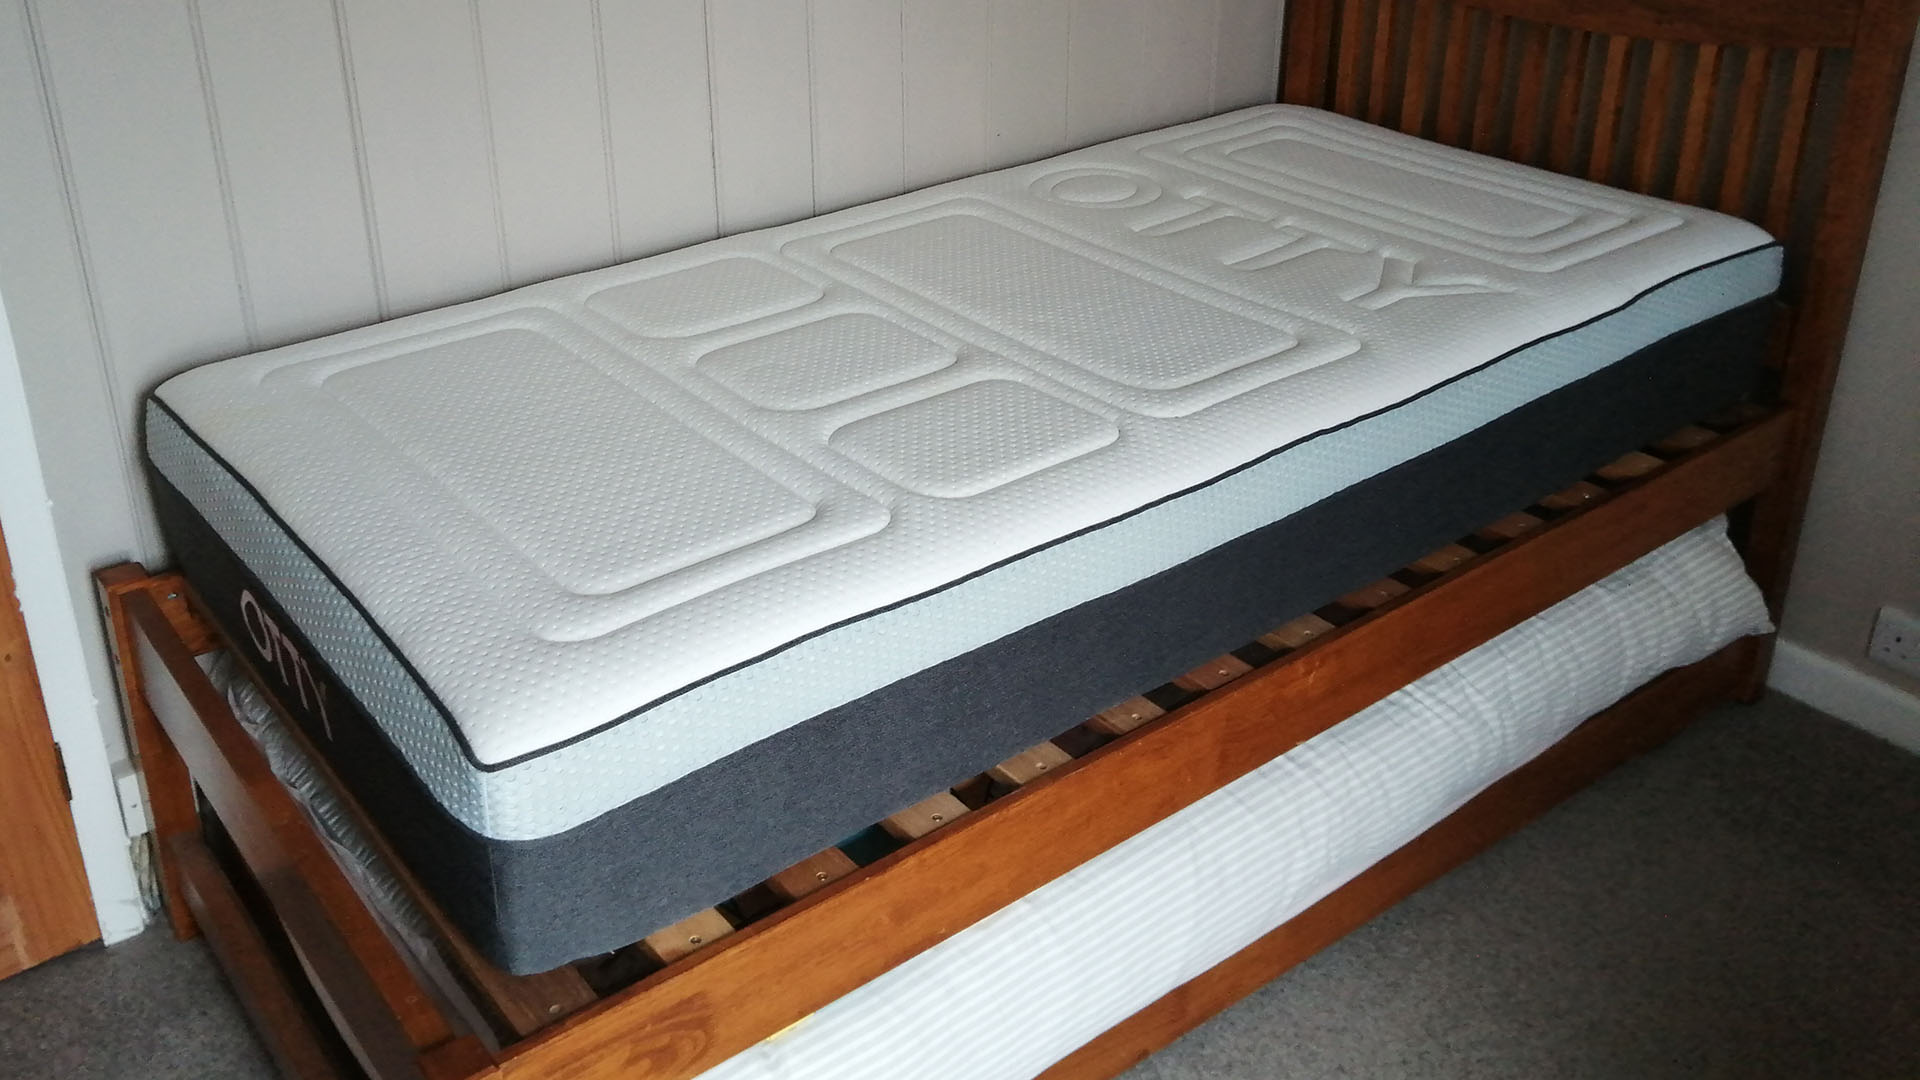 Otty Pure mattress on a wooden bed frame in reviewer's bedroom